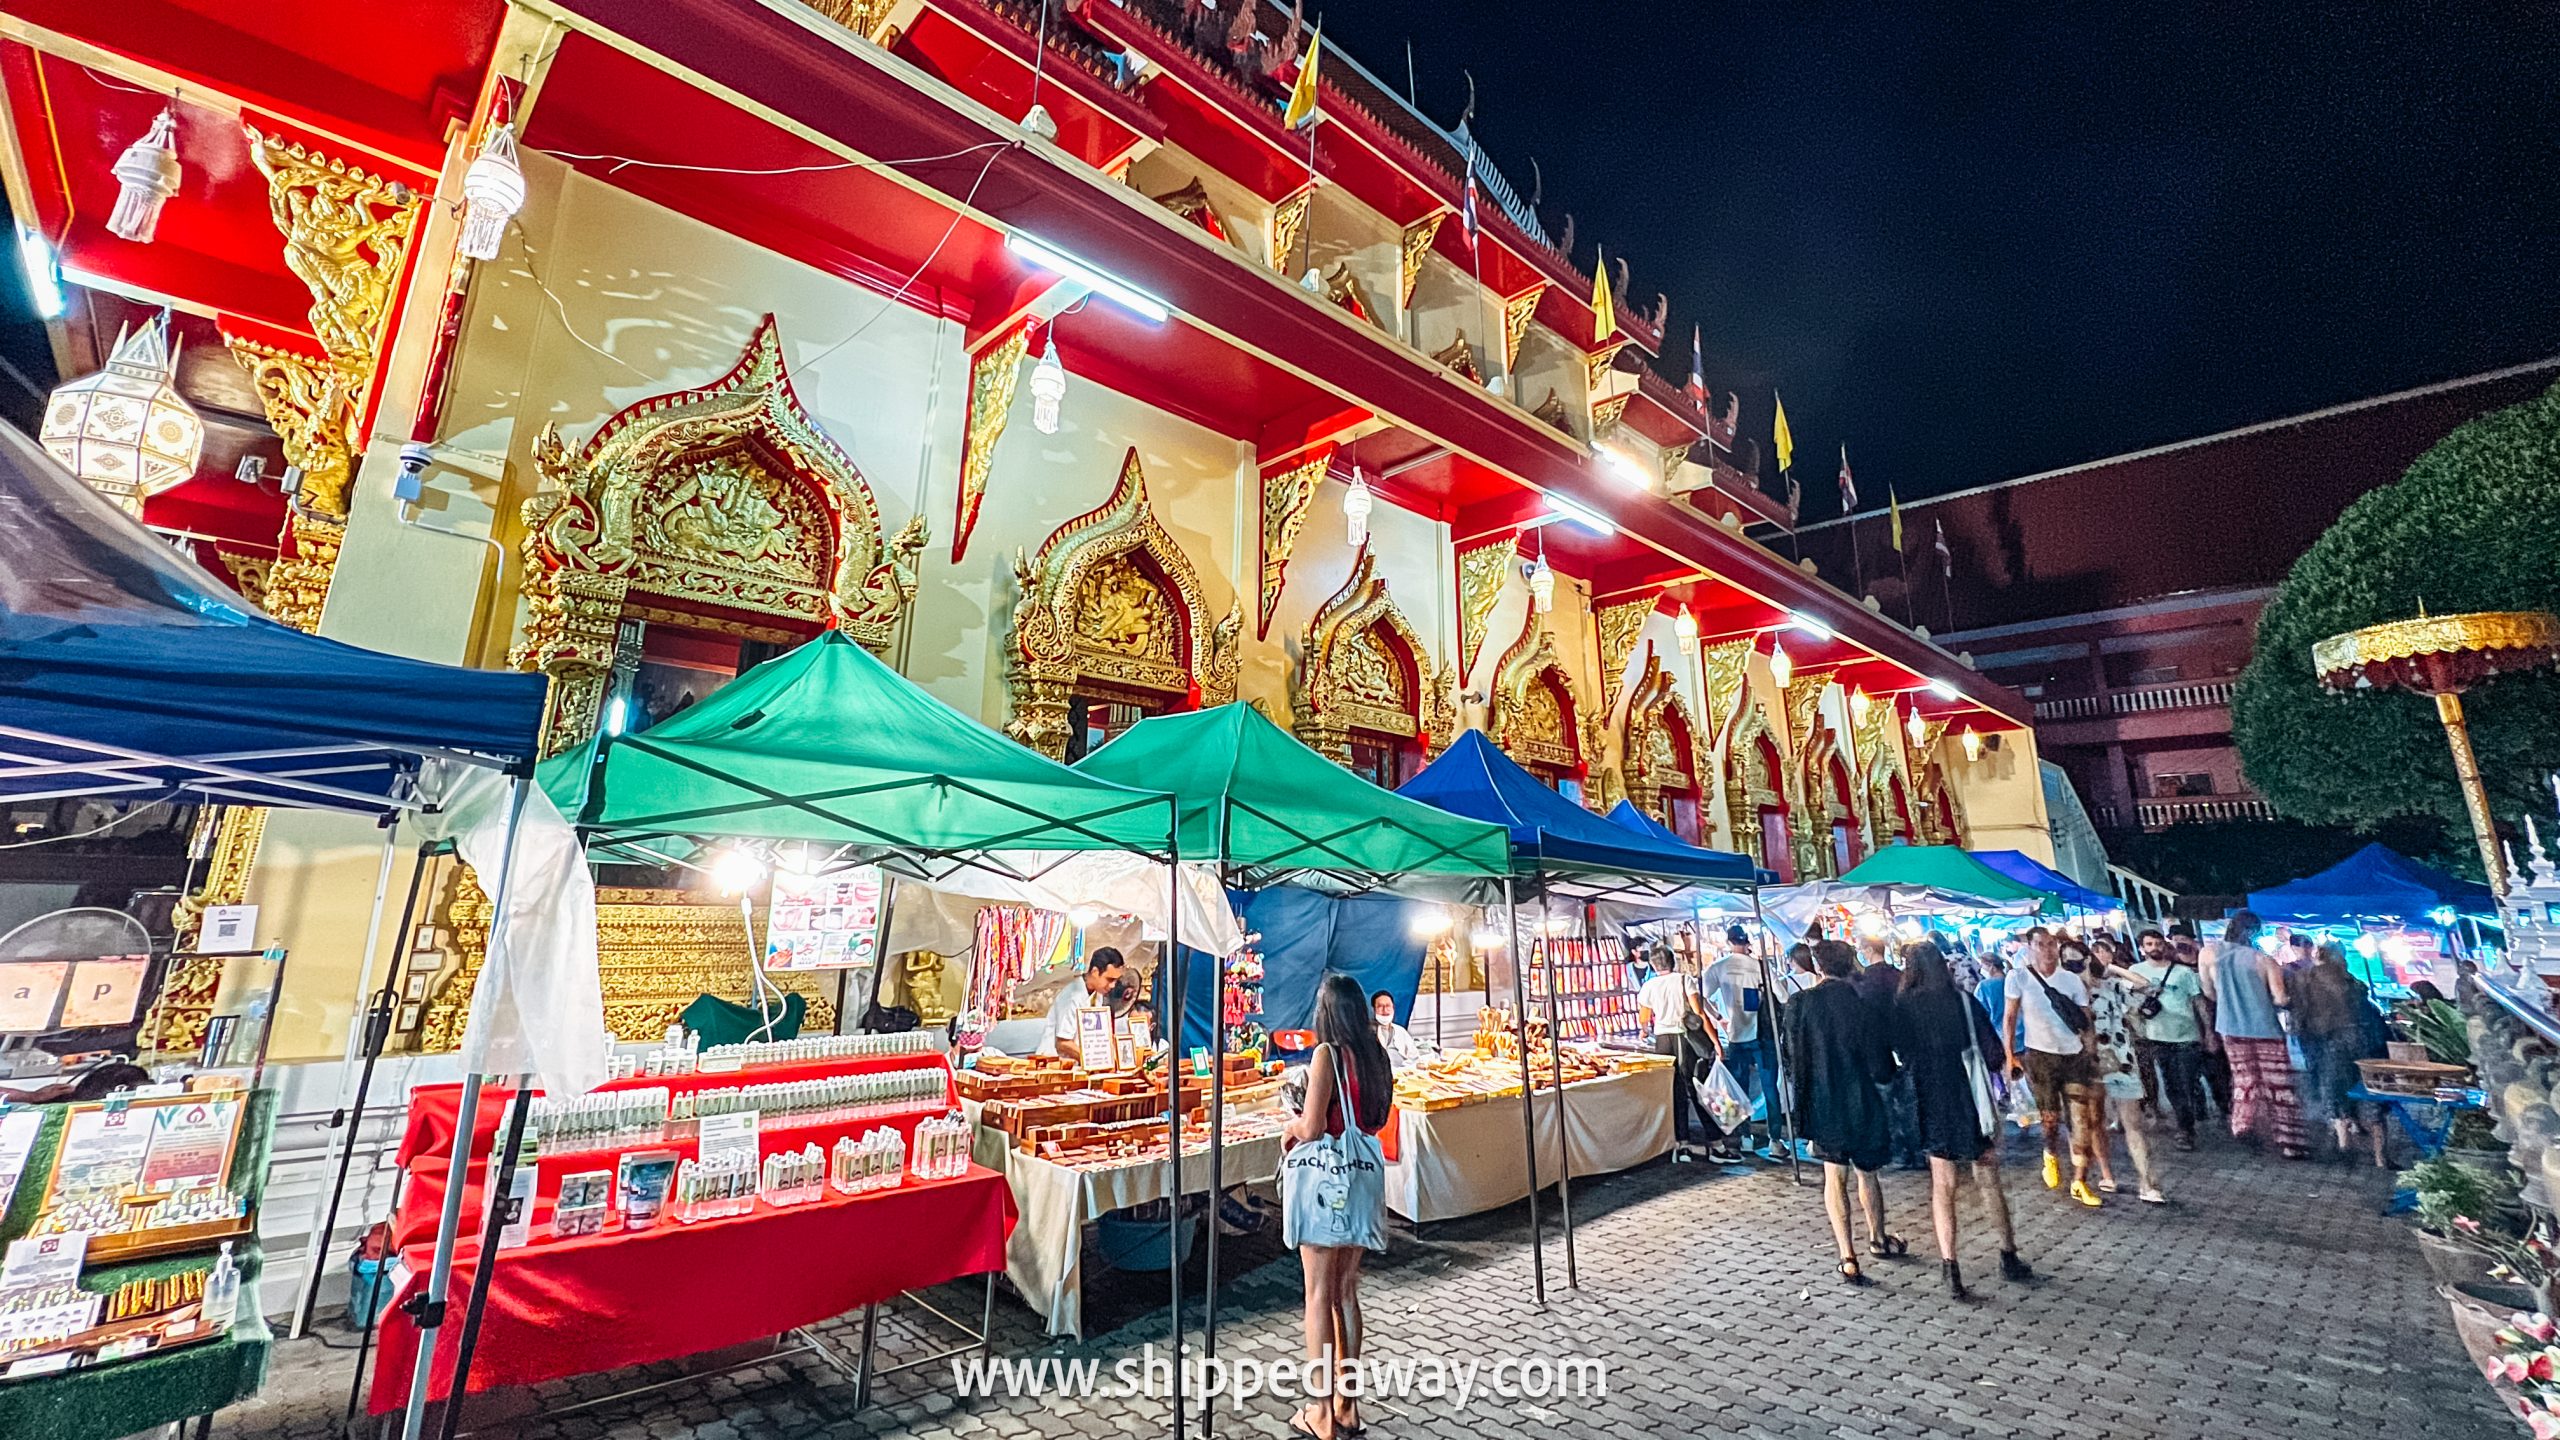 Discover the bustling atmosphere of the Chiang Mai Sunday Night Market at Tha Pae Walking Street. Plan your visit with our insightful guide.